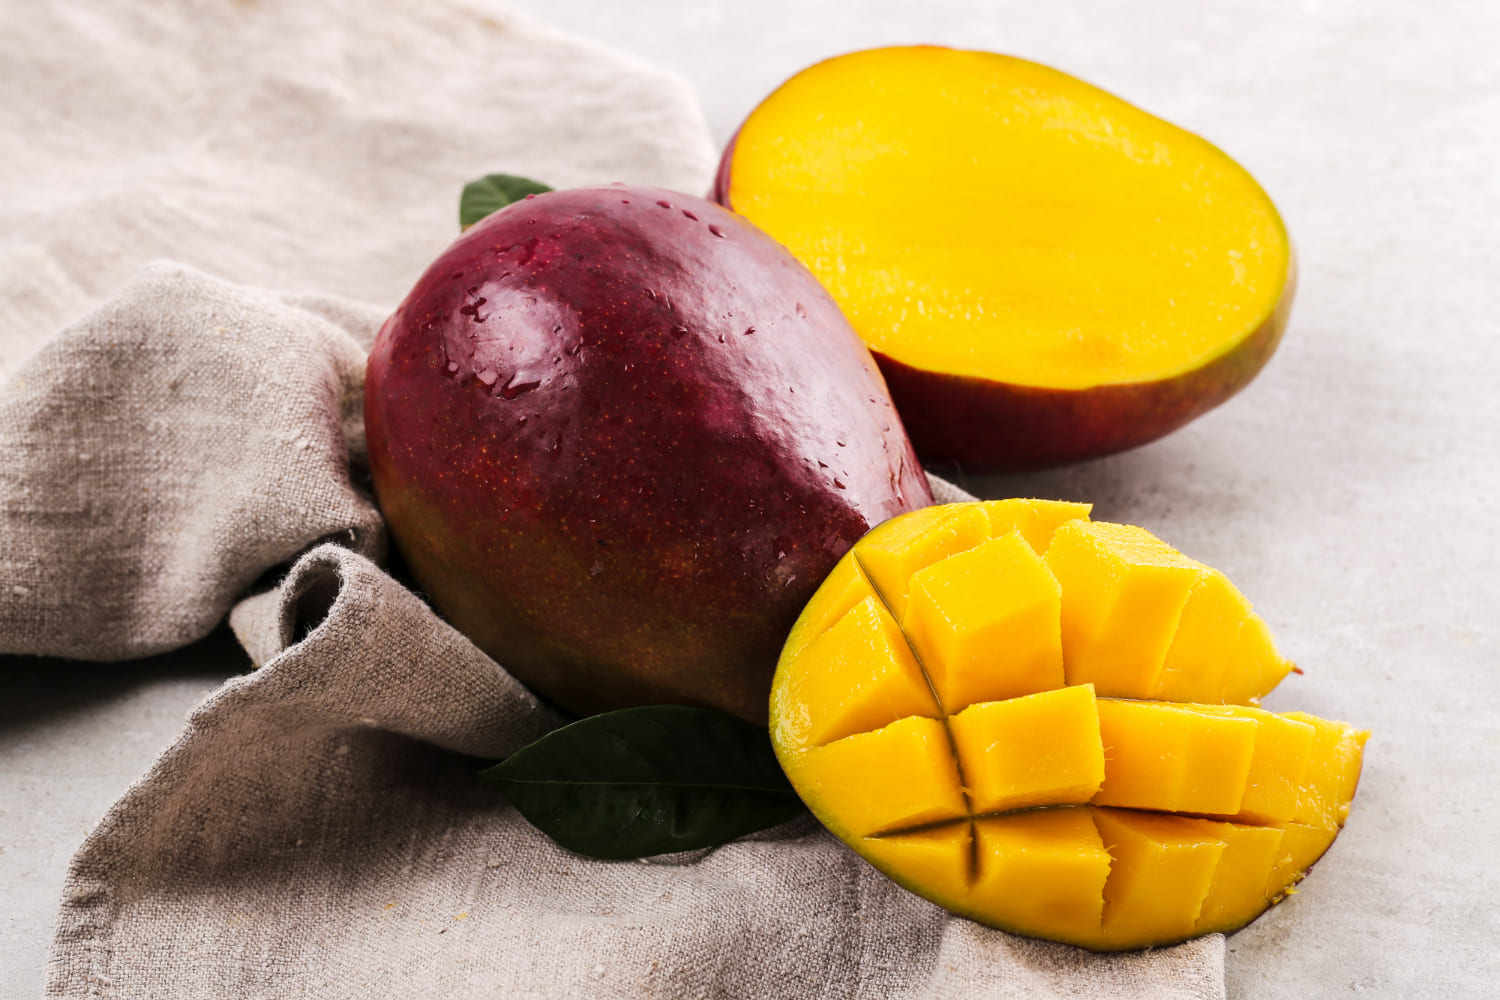 How to tell if mango is ripe